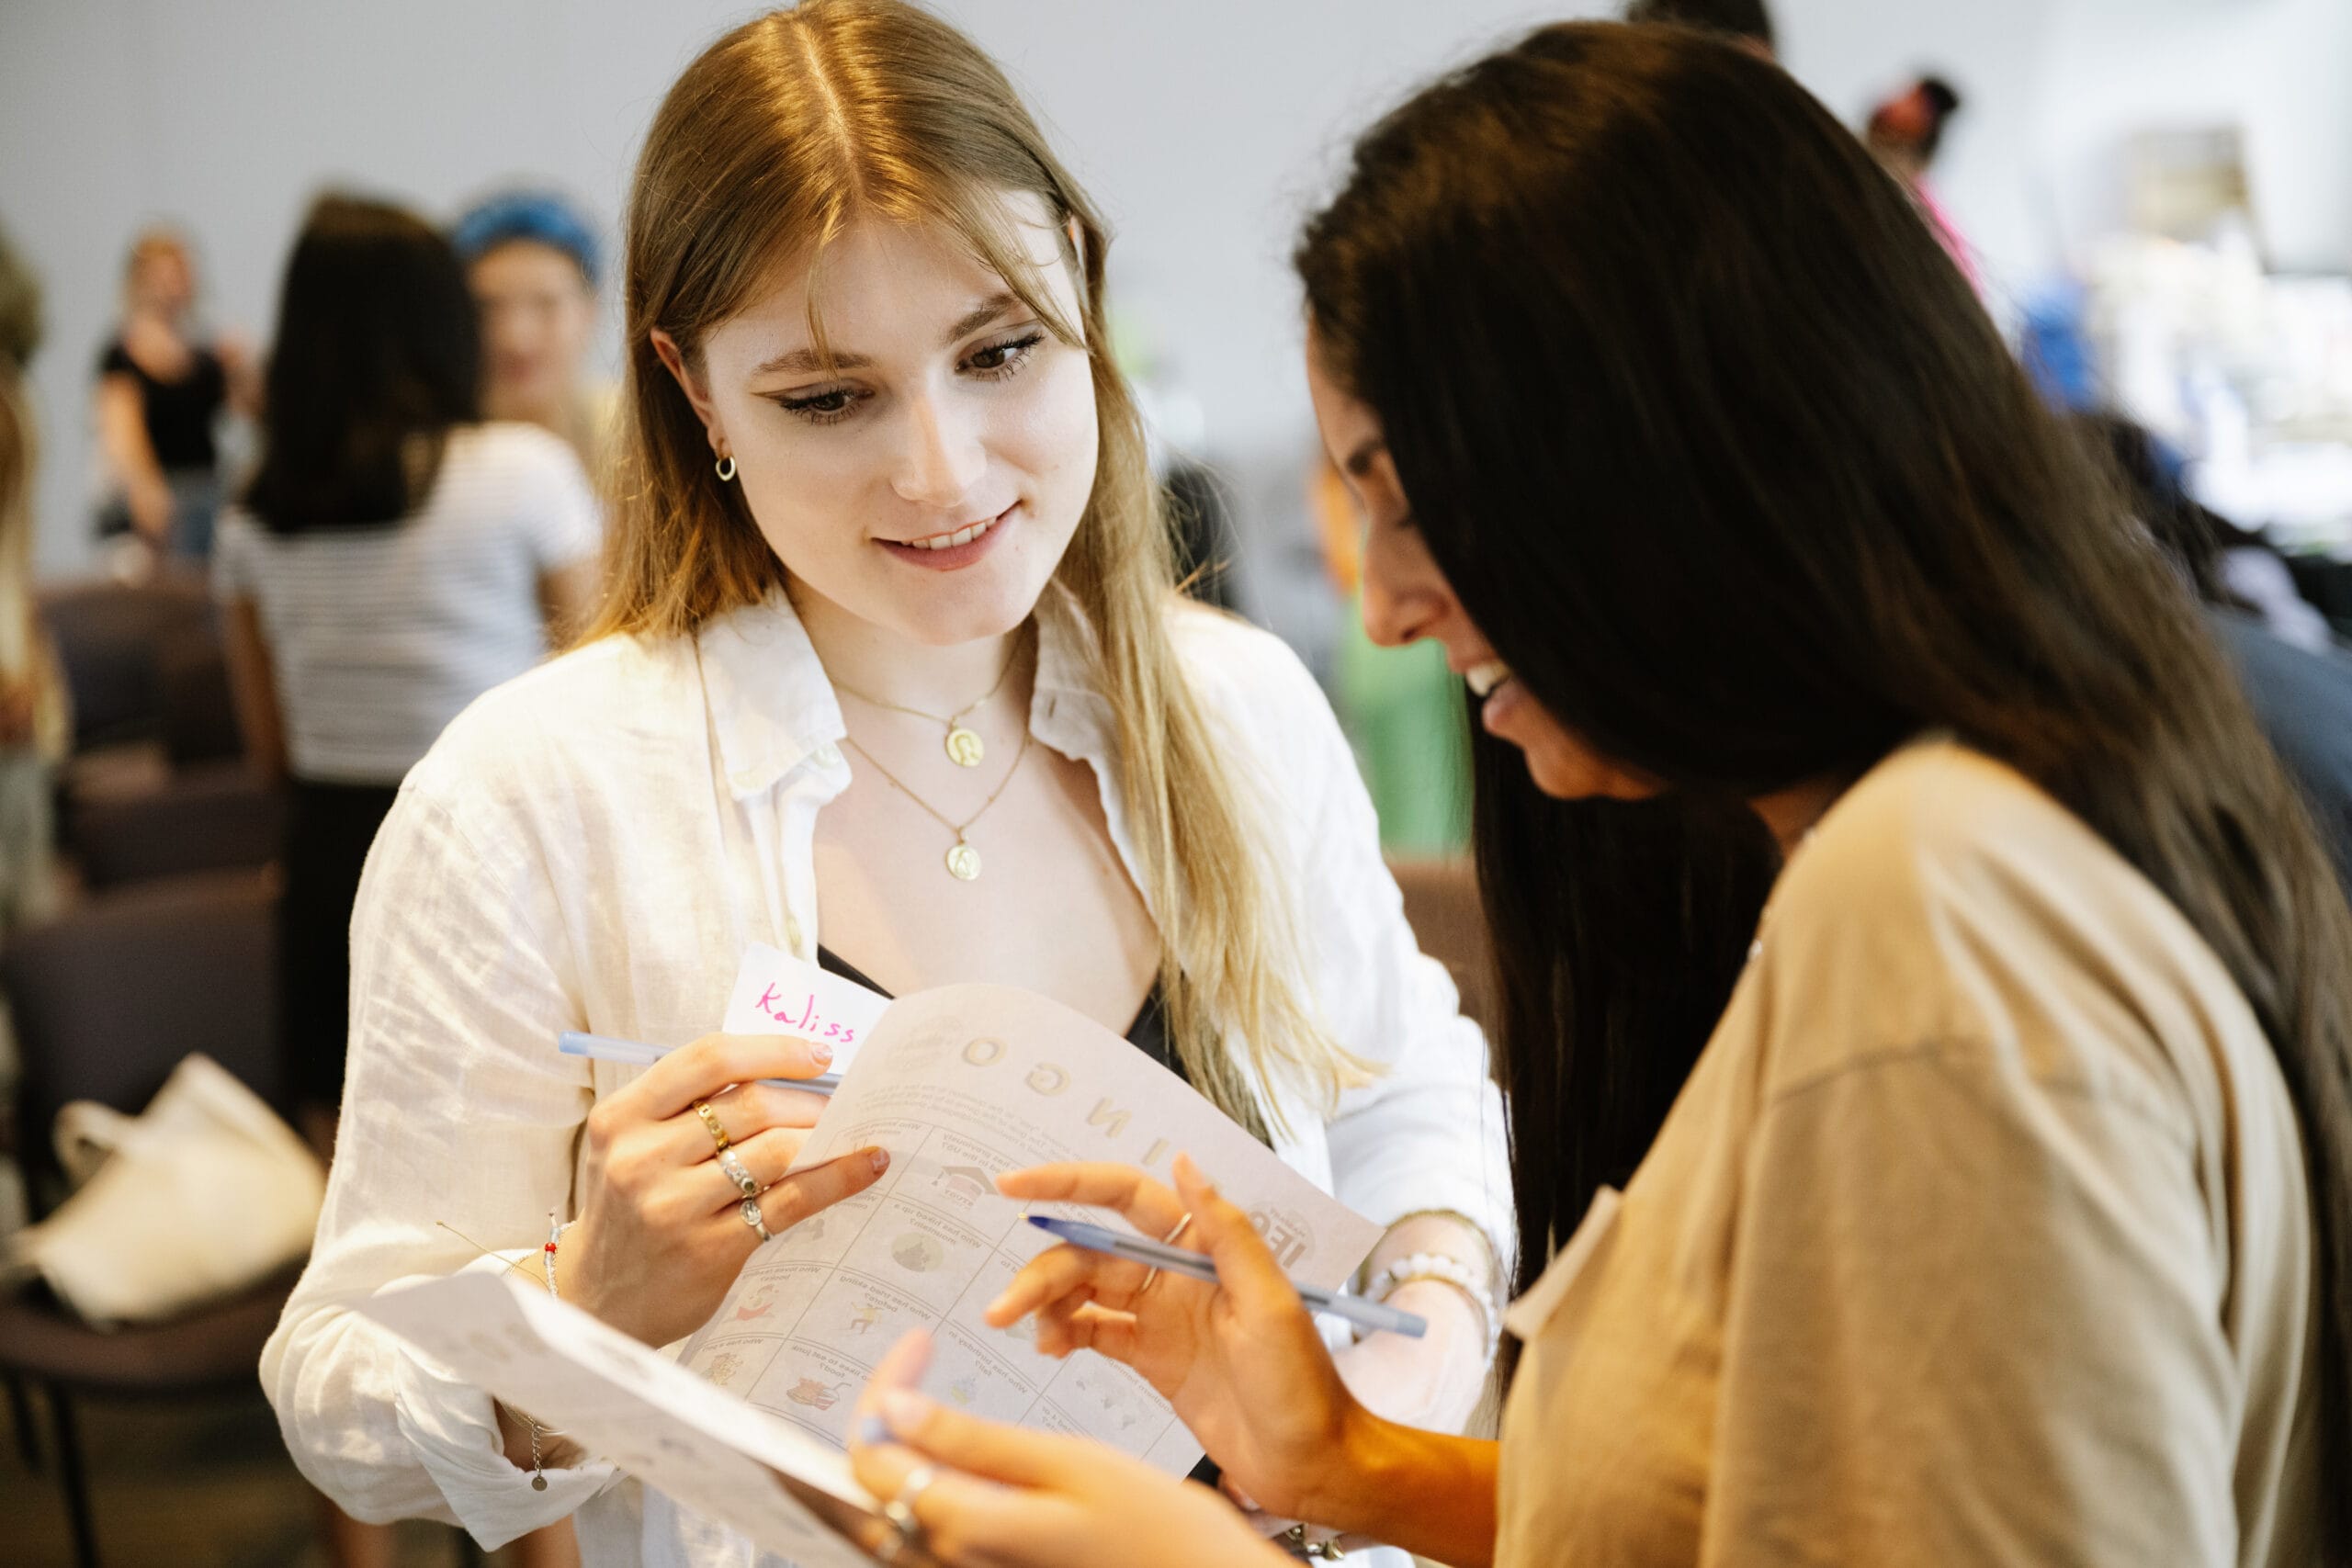 A blonde student in a white shirt smiles and talks to another student looking down at a piece of paper.